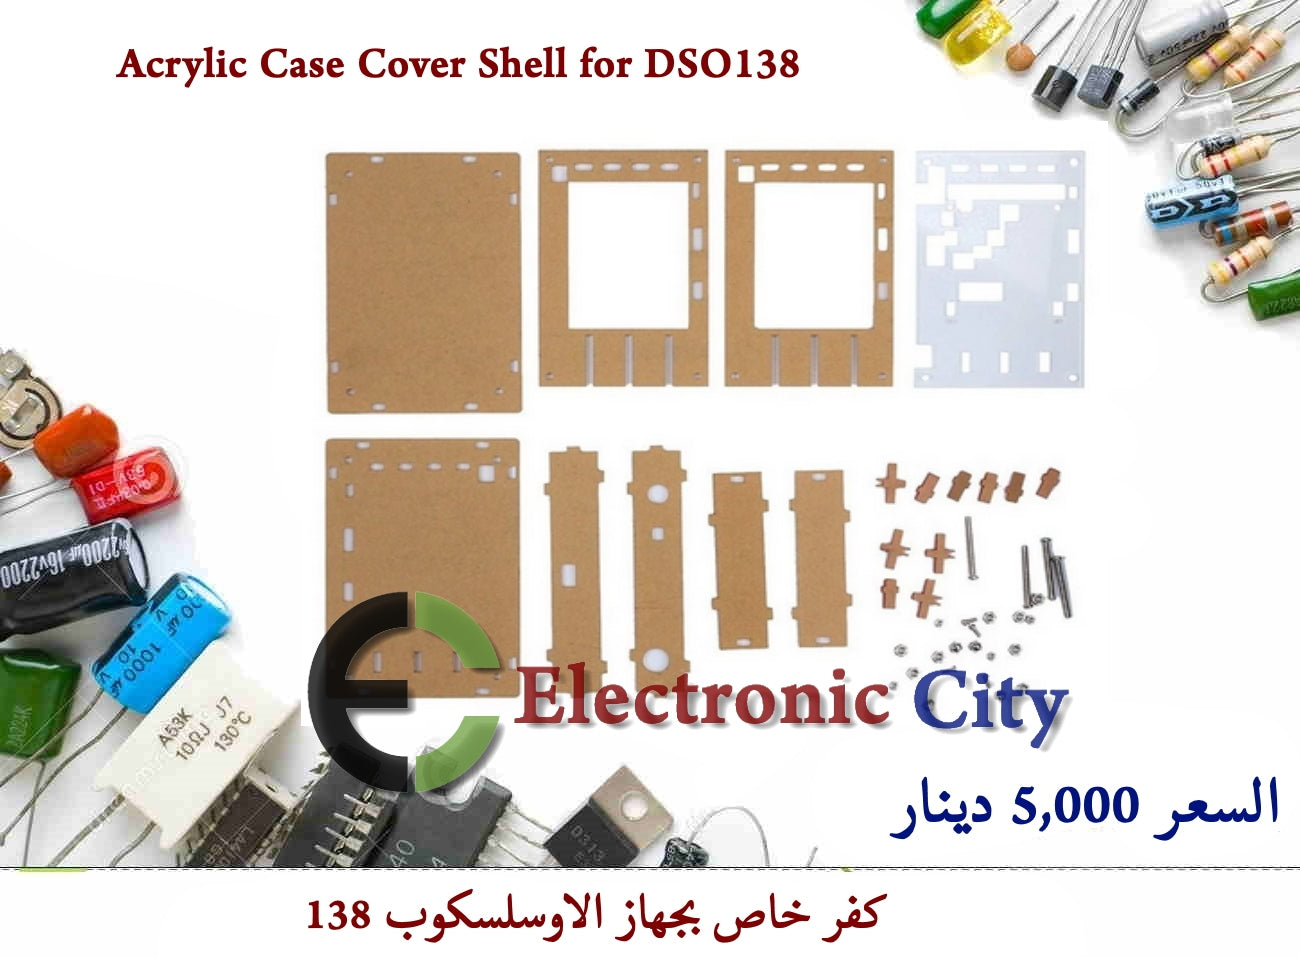 Acrylic Case Cover Shell for DSO138 #2 050602